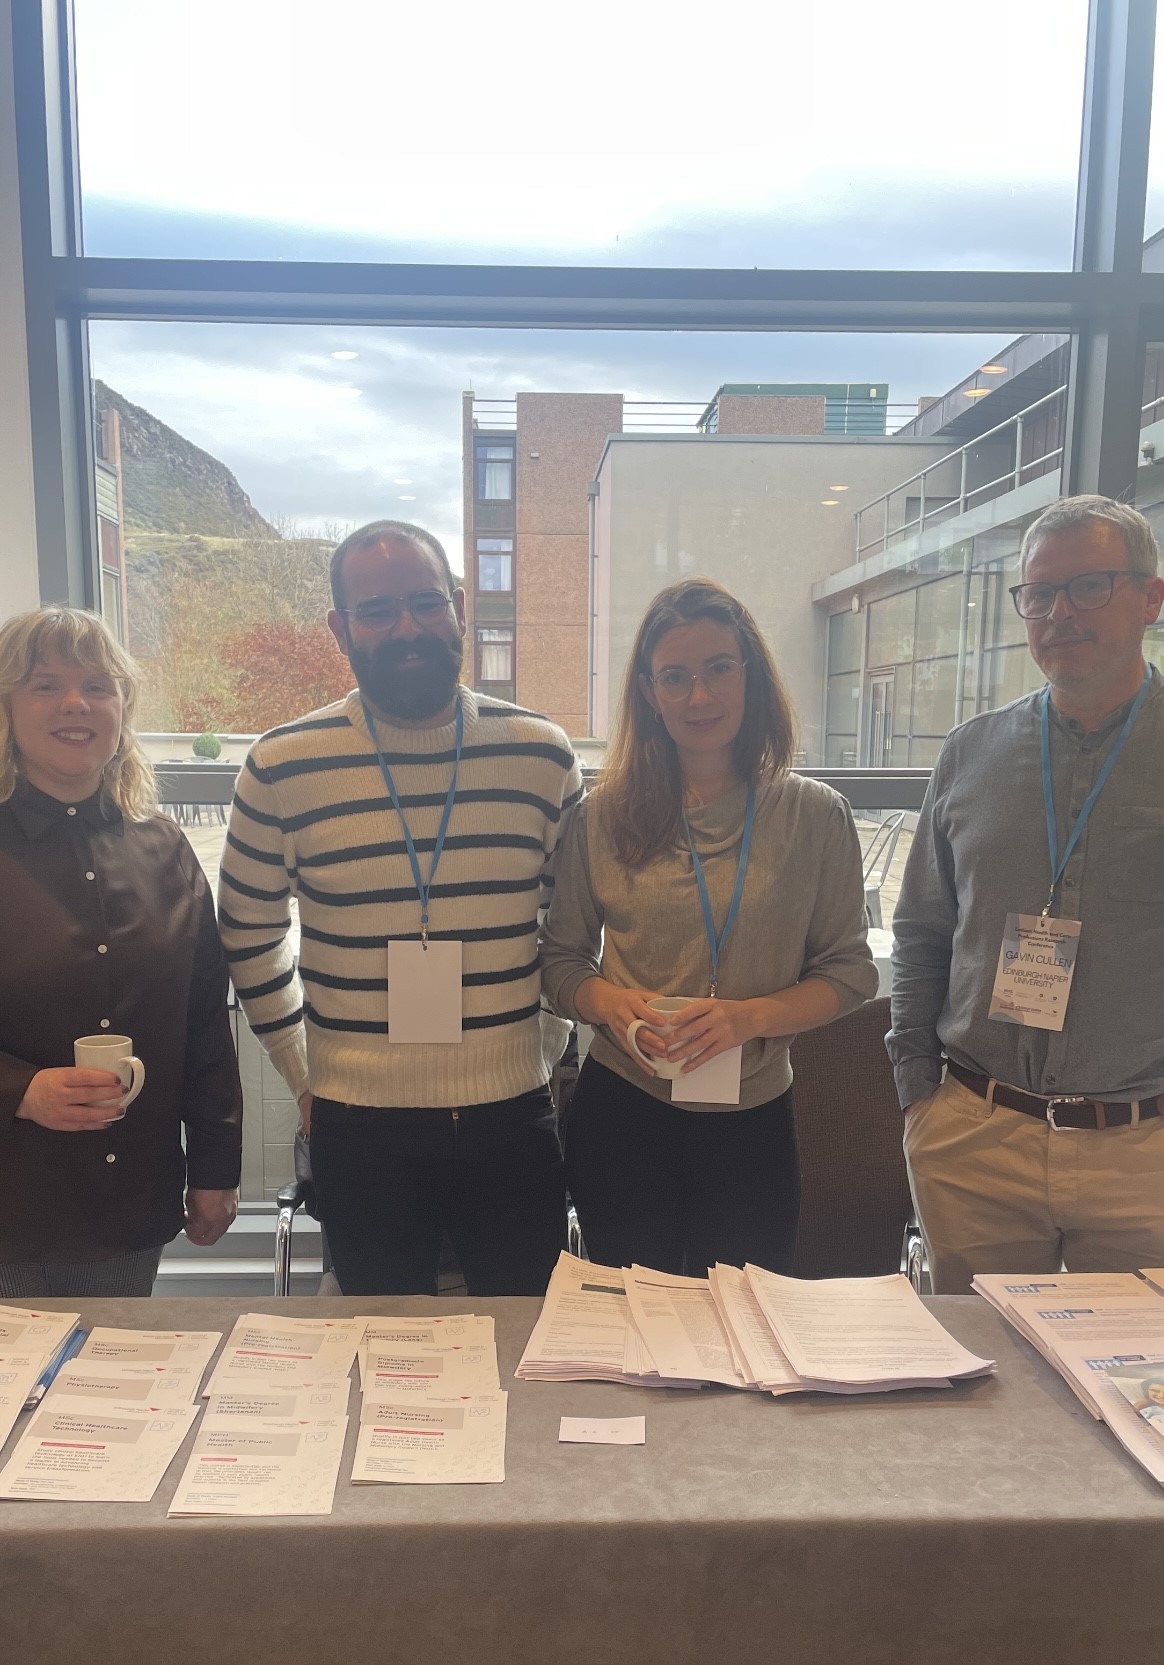 Group image of Edinburgh Napier School of Health and Social Care academics at a desk in front of a window attending a conference.